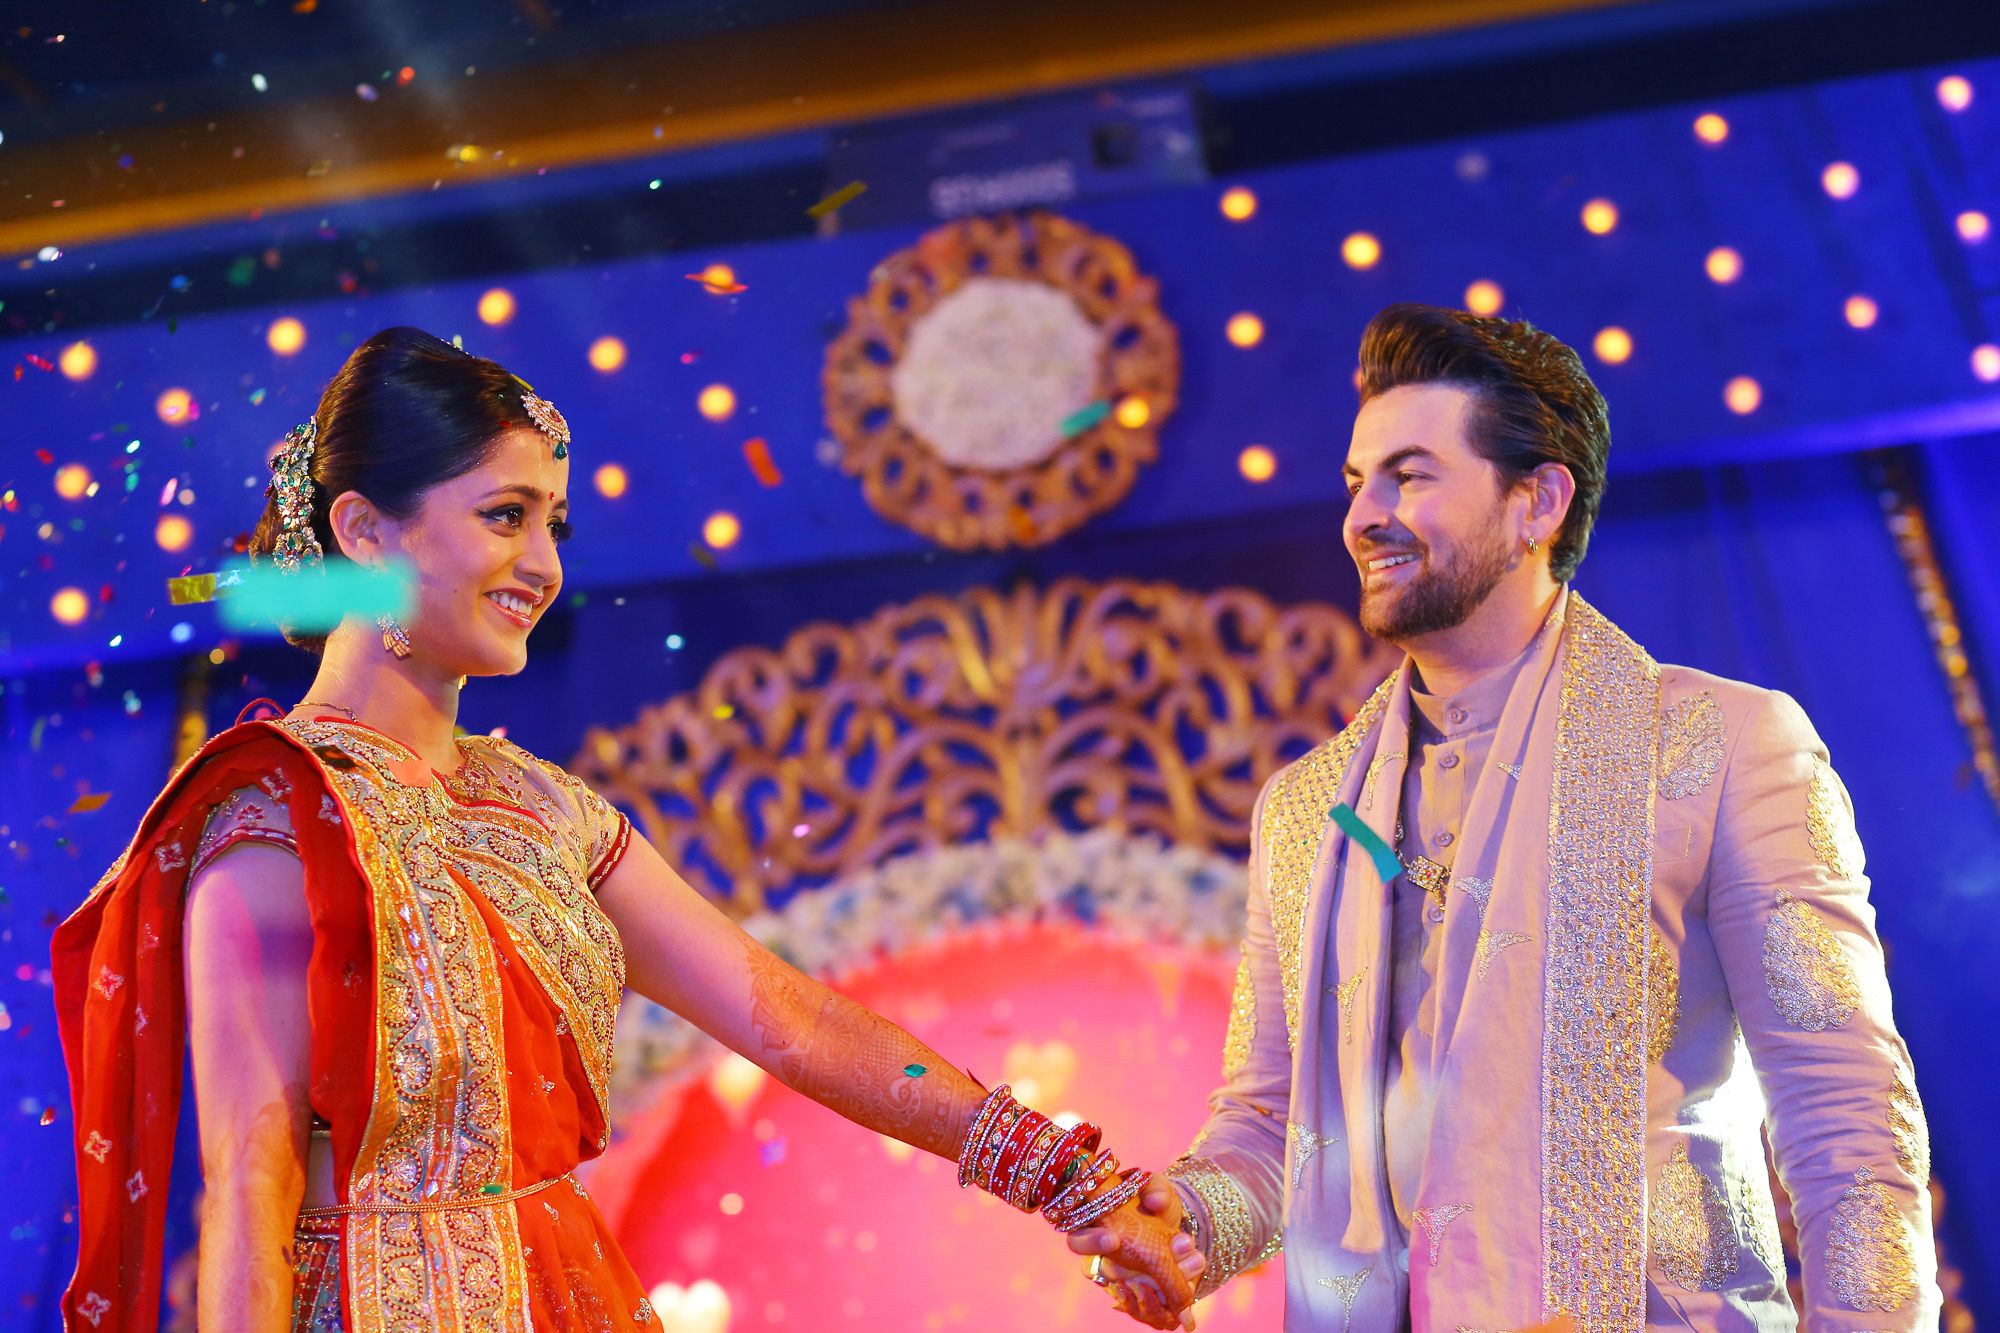 Neil Nitin Mukesh Just Posted The Cutest Photo With His Wife